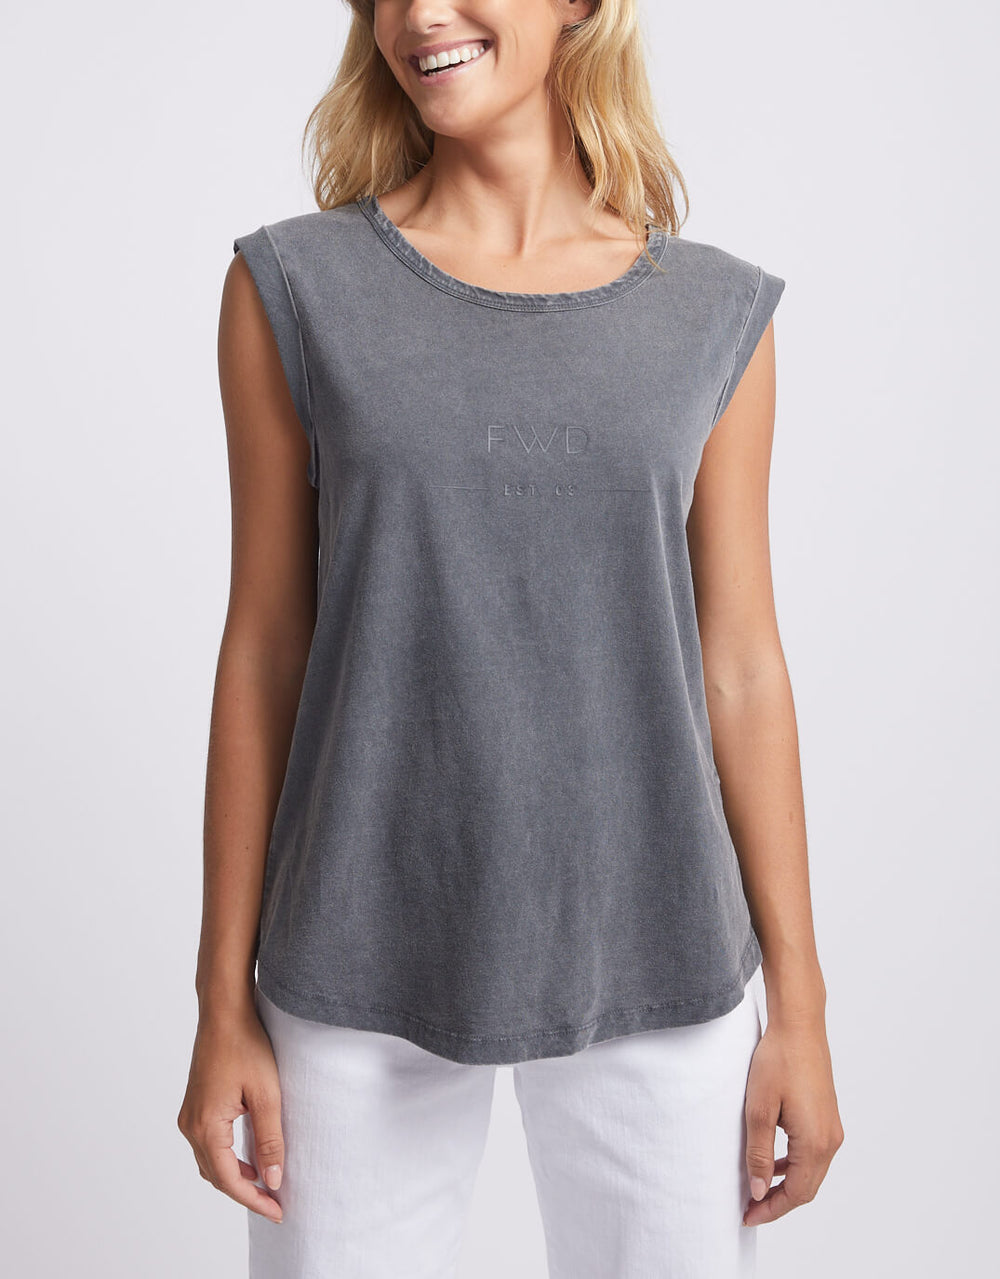 foxwood-fwd-tank-washed-black-womens-clothing